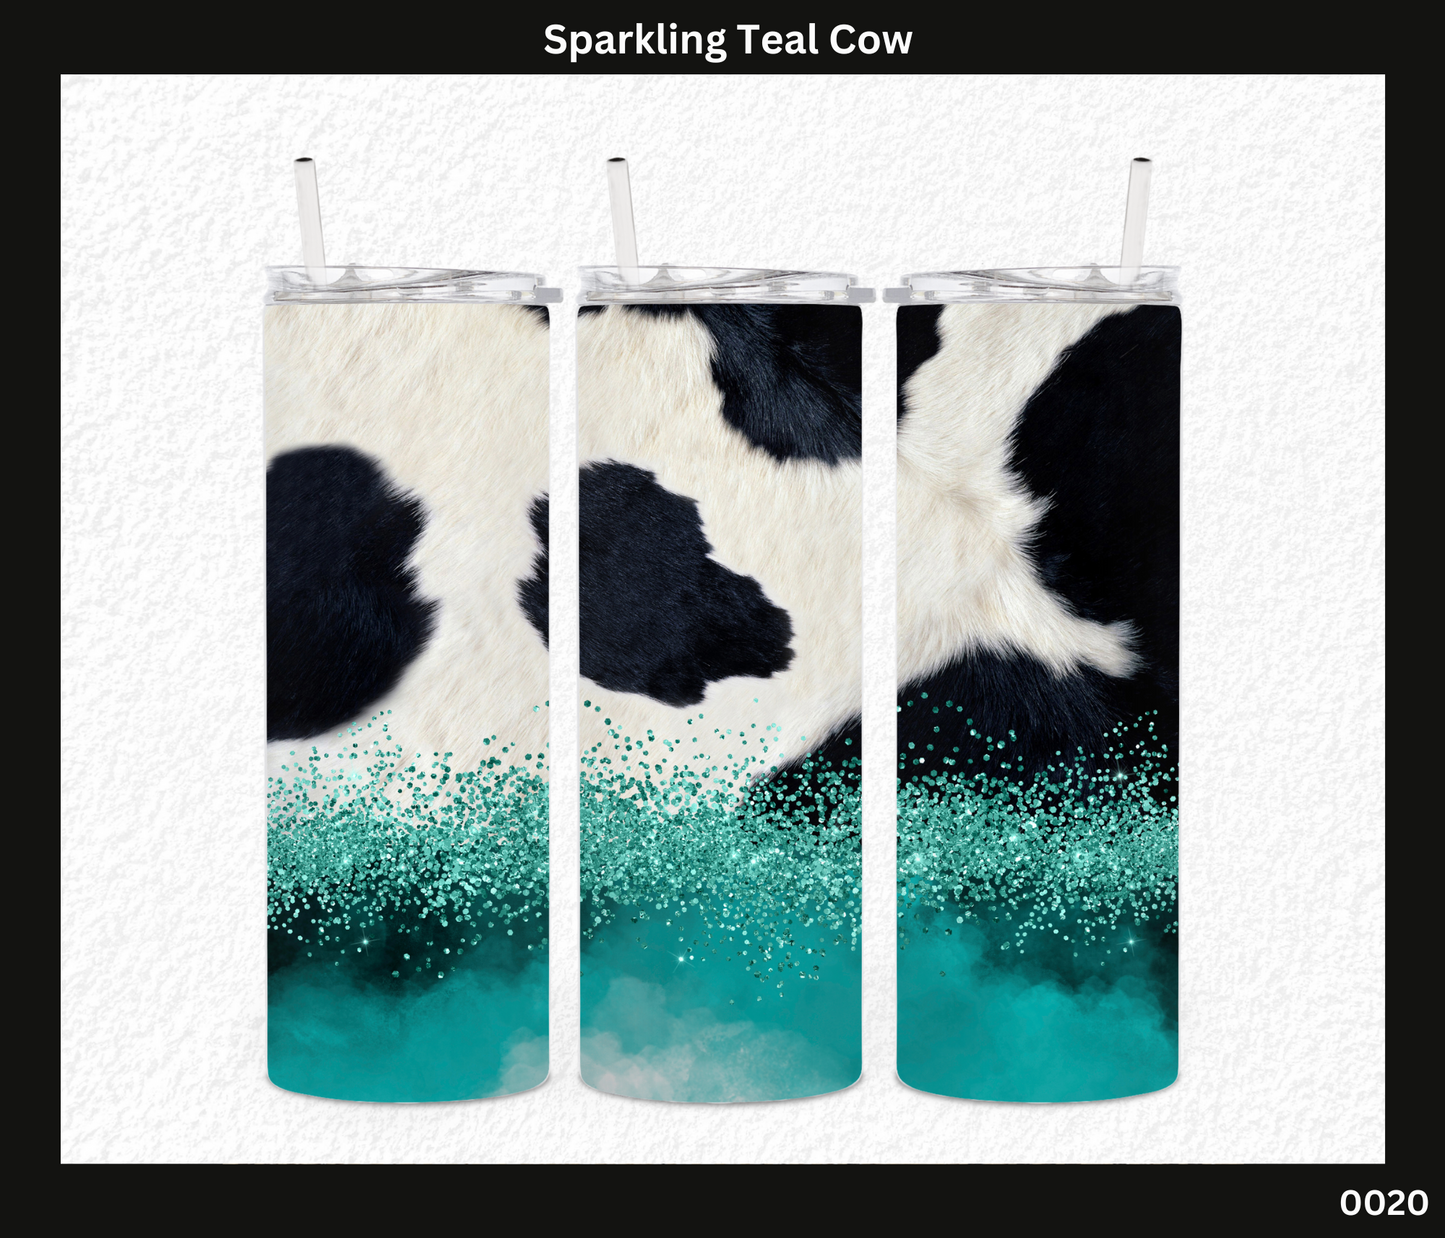 Sparkling Teal Cow